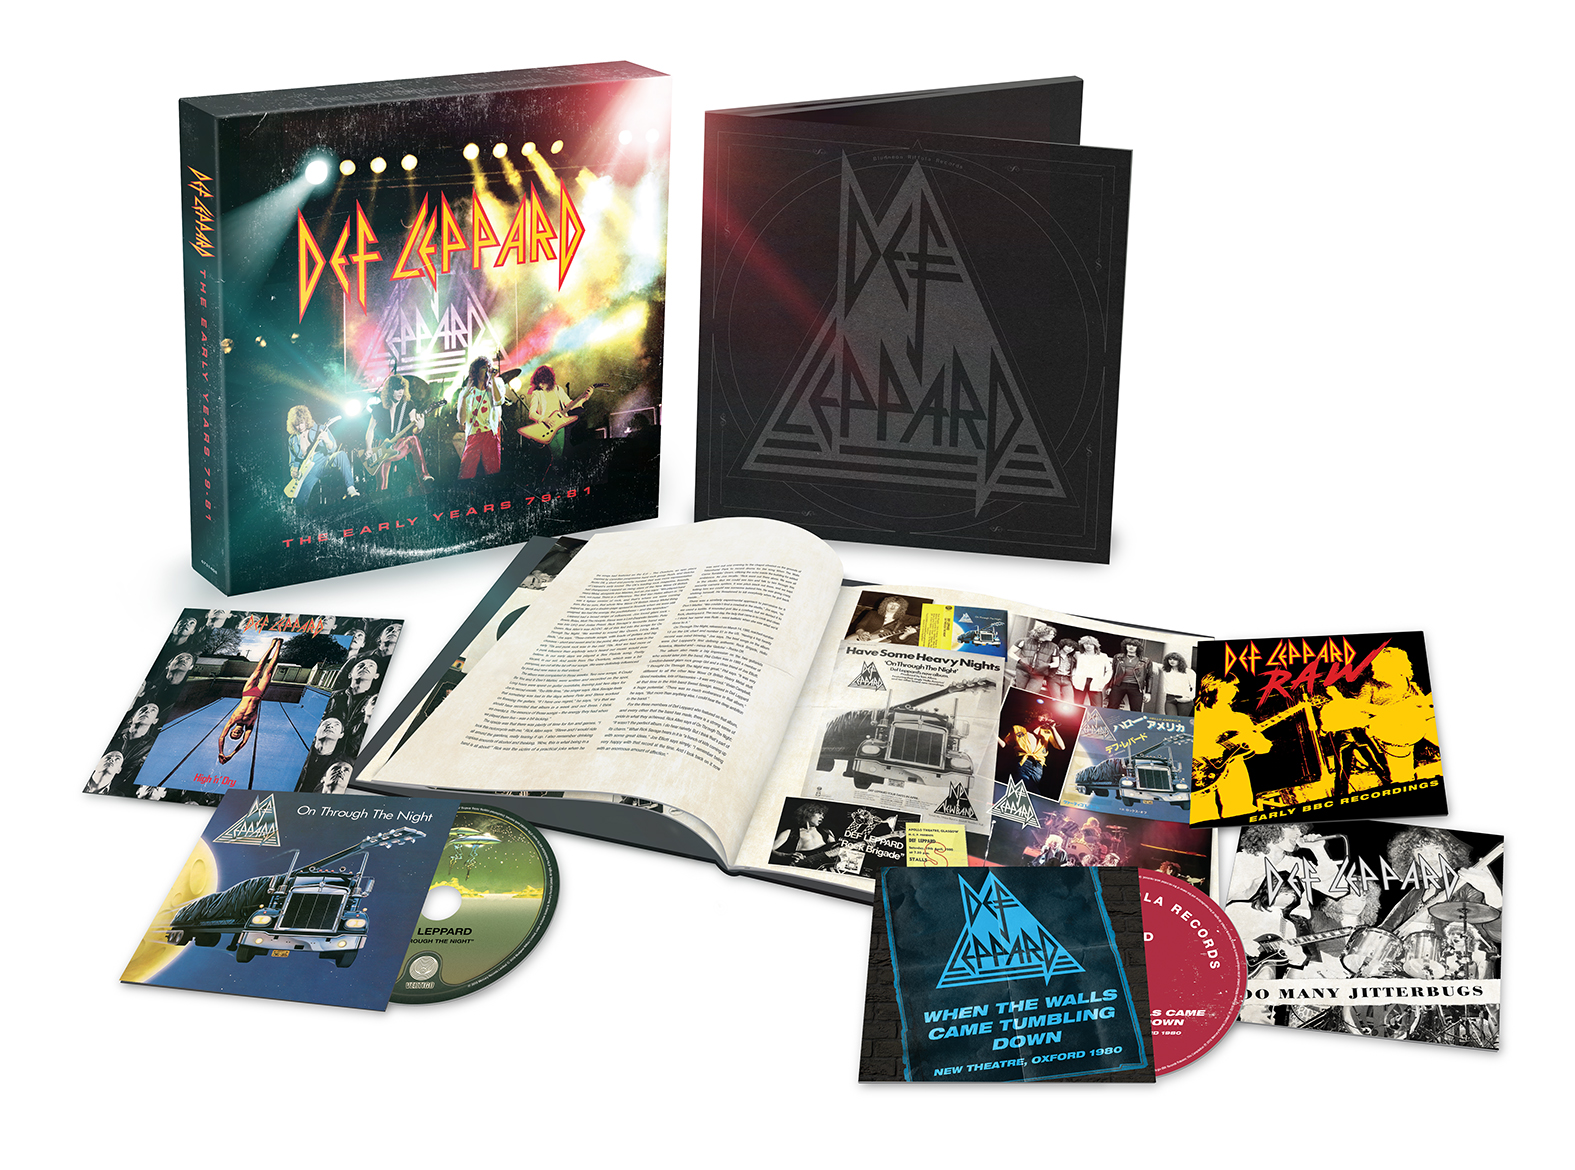 Def Leppard: The Early Years 79-81' Box Set (Review)